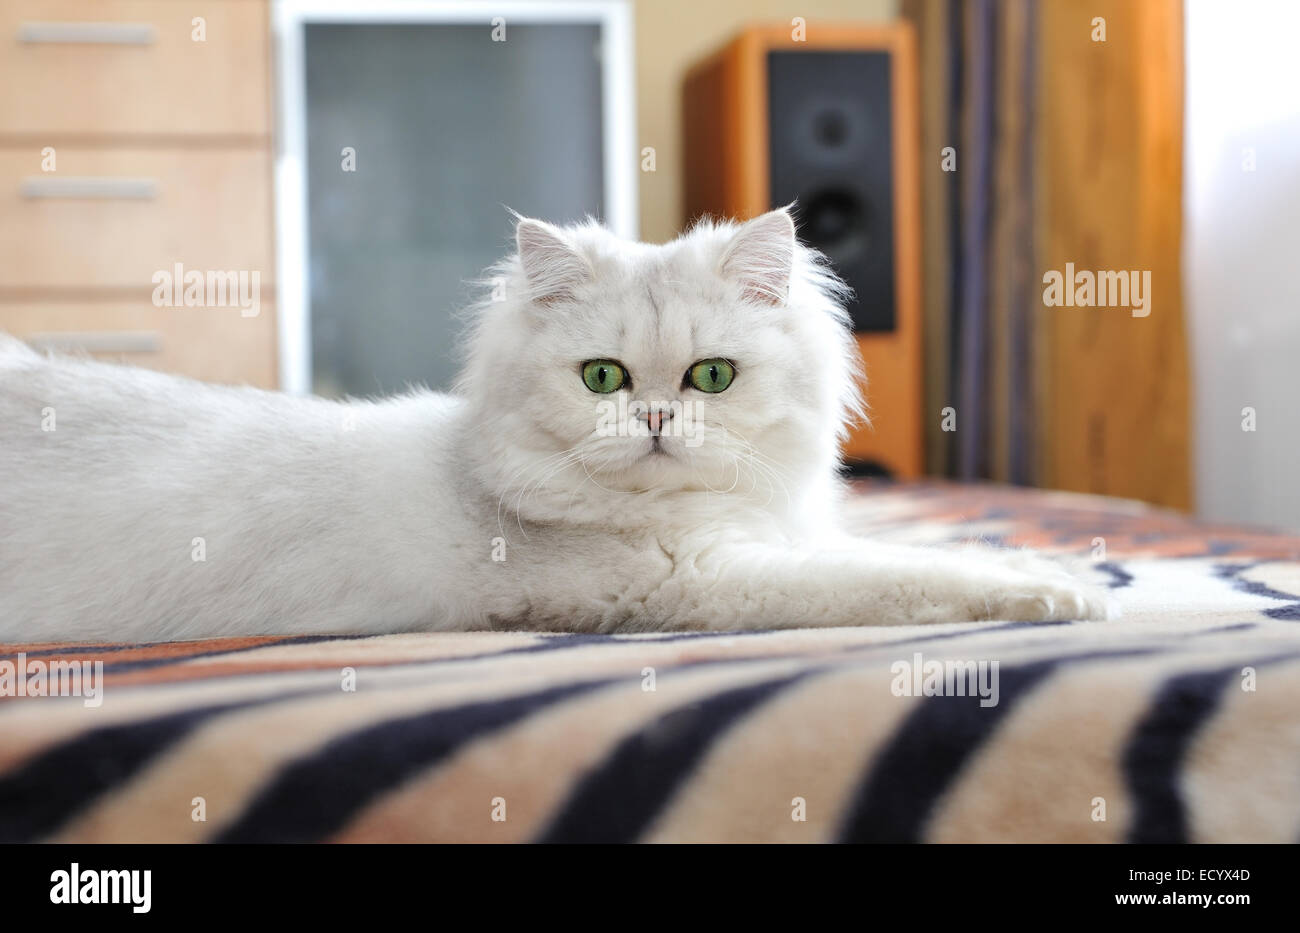 White cat with green eyes lying on the couch. Stock Photo